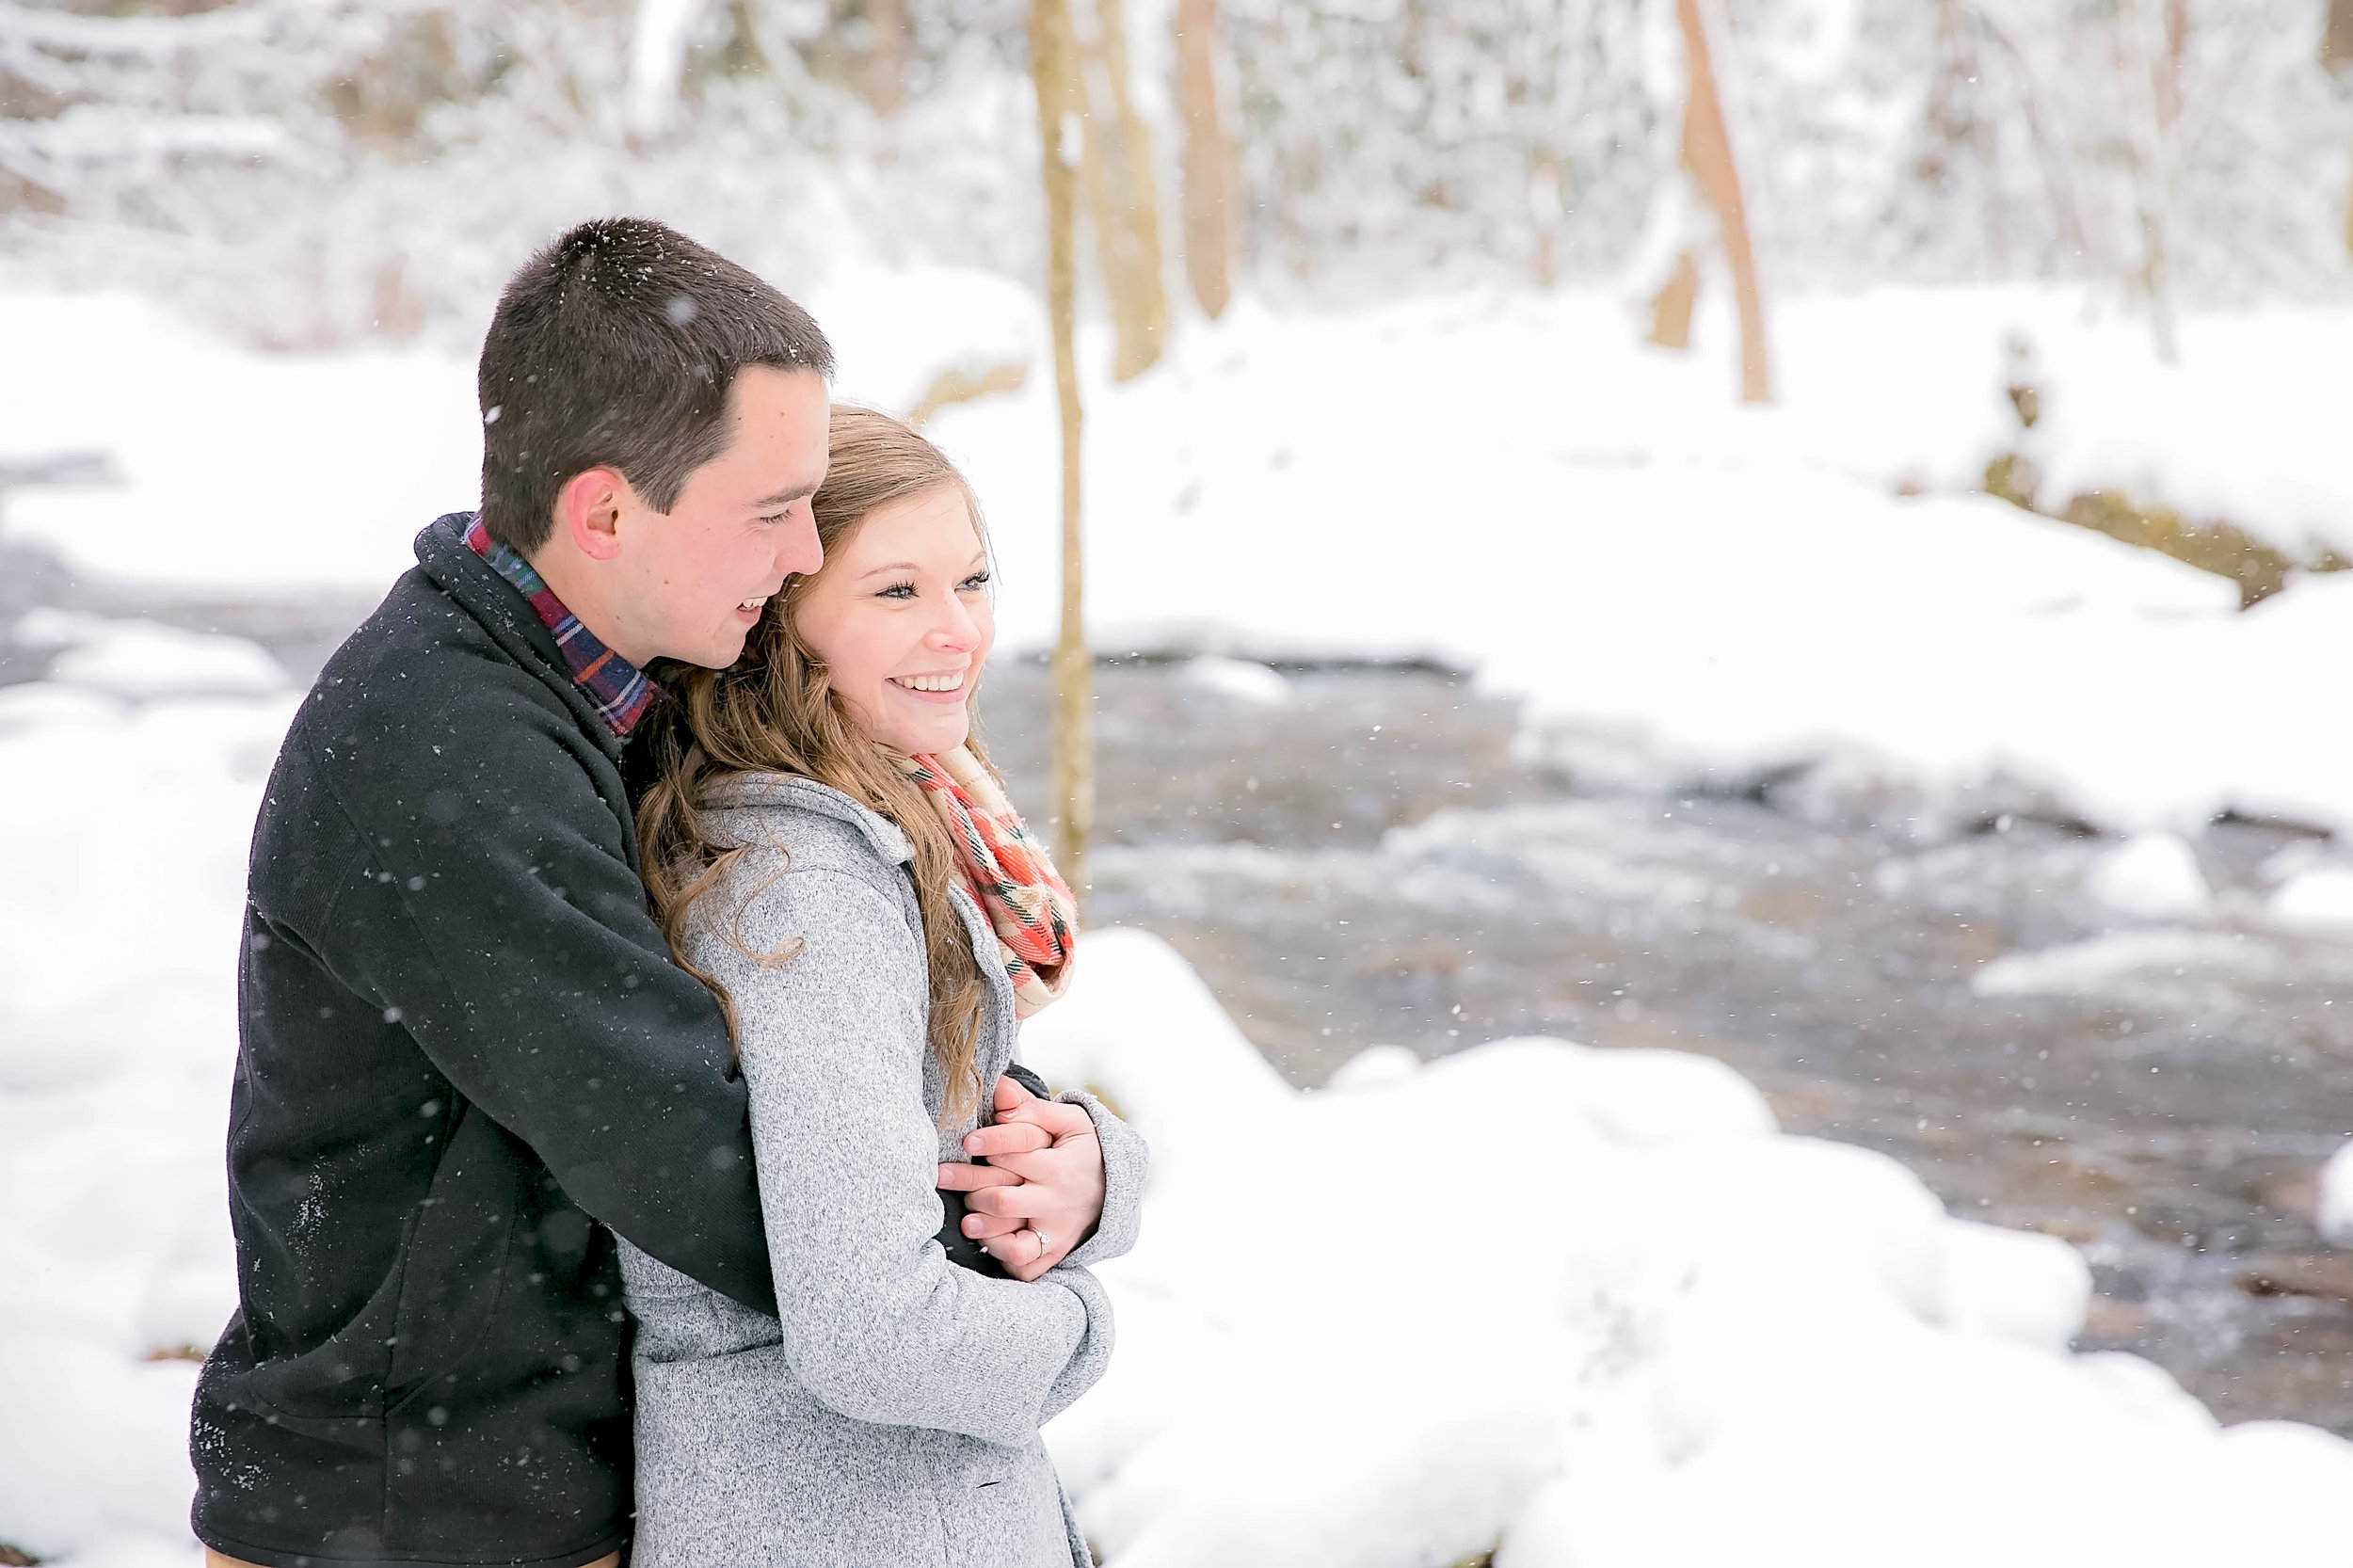 Laurel Falls hiking trail engagement session, romantic hike, East Tennessee snow engagement picture, Tri Cities wedding photography, Johnson City, TN photography, romantic couple in the snow